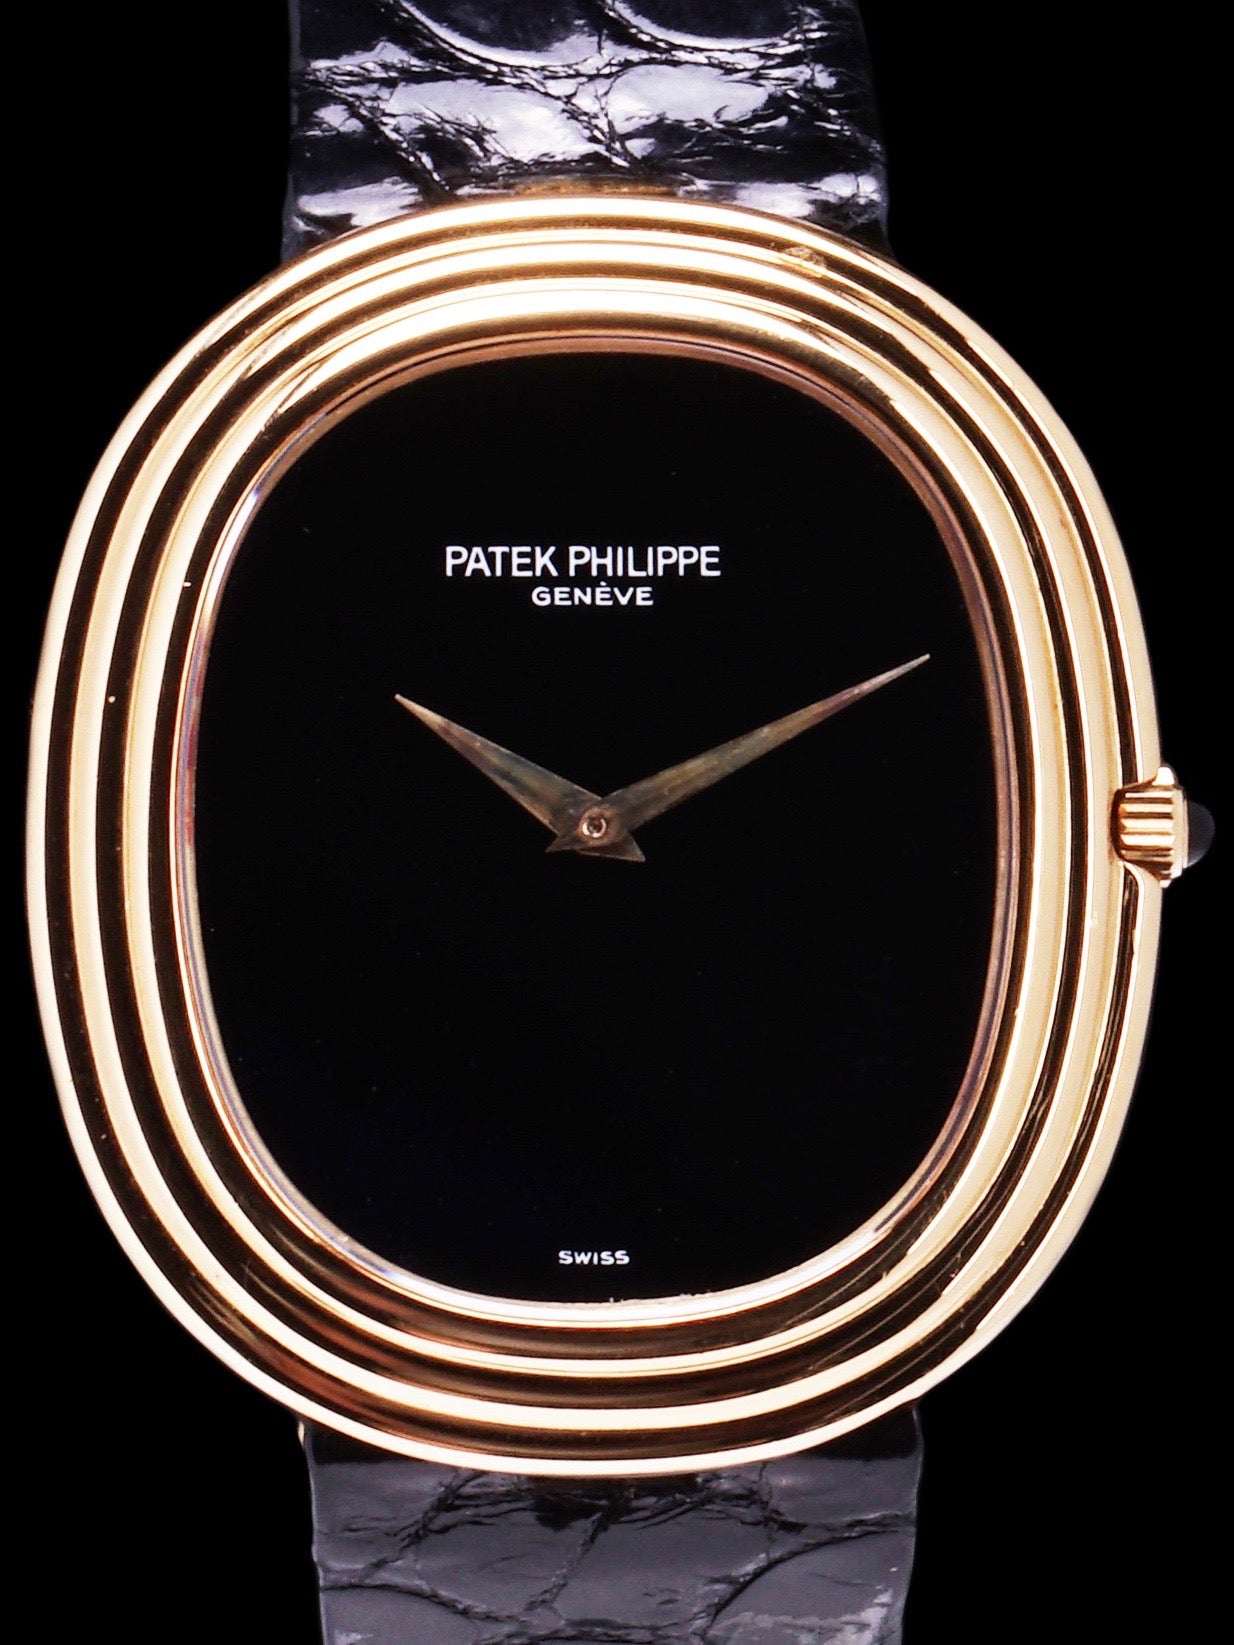 1977 Patek Philippe Ellipse (Ref. 3634J) 18K YG Onyx Dial With Box and Archive